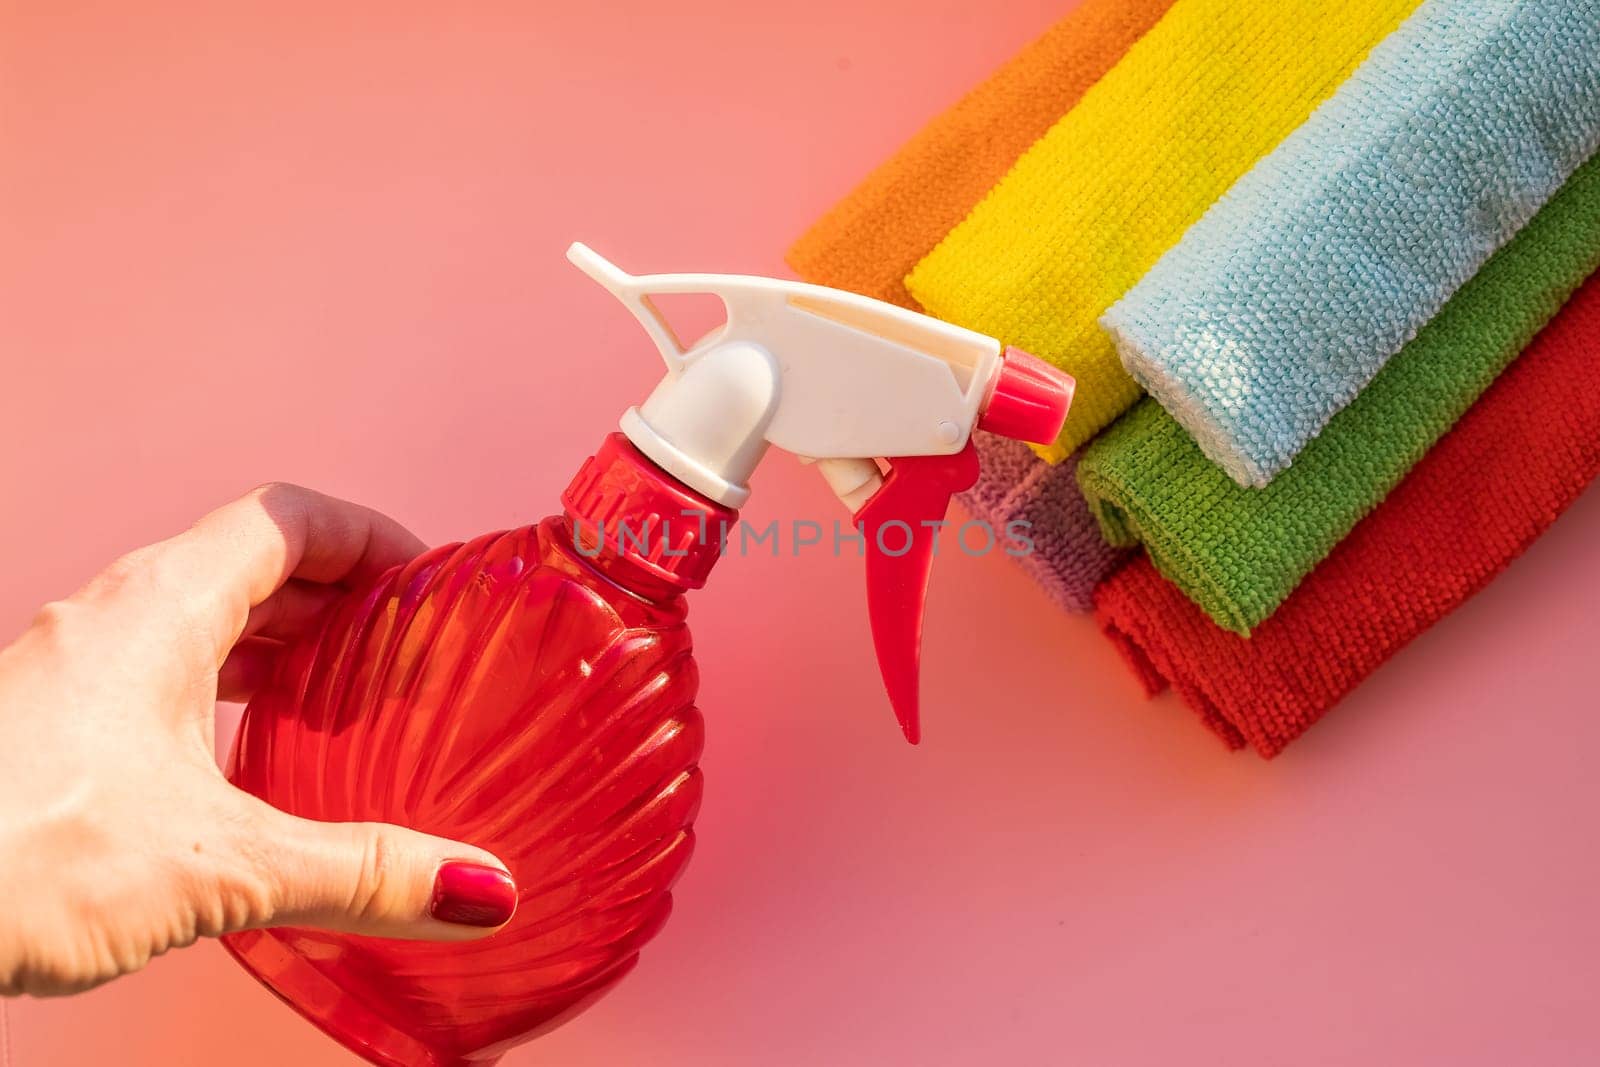 Housekeeper, rubber protective gloves. Clean with detergent and microfiber cloth.